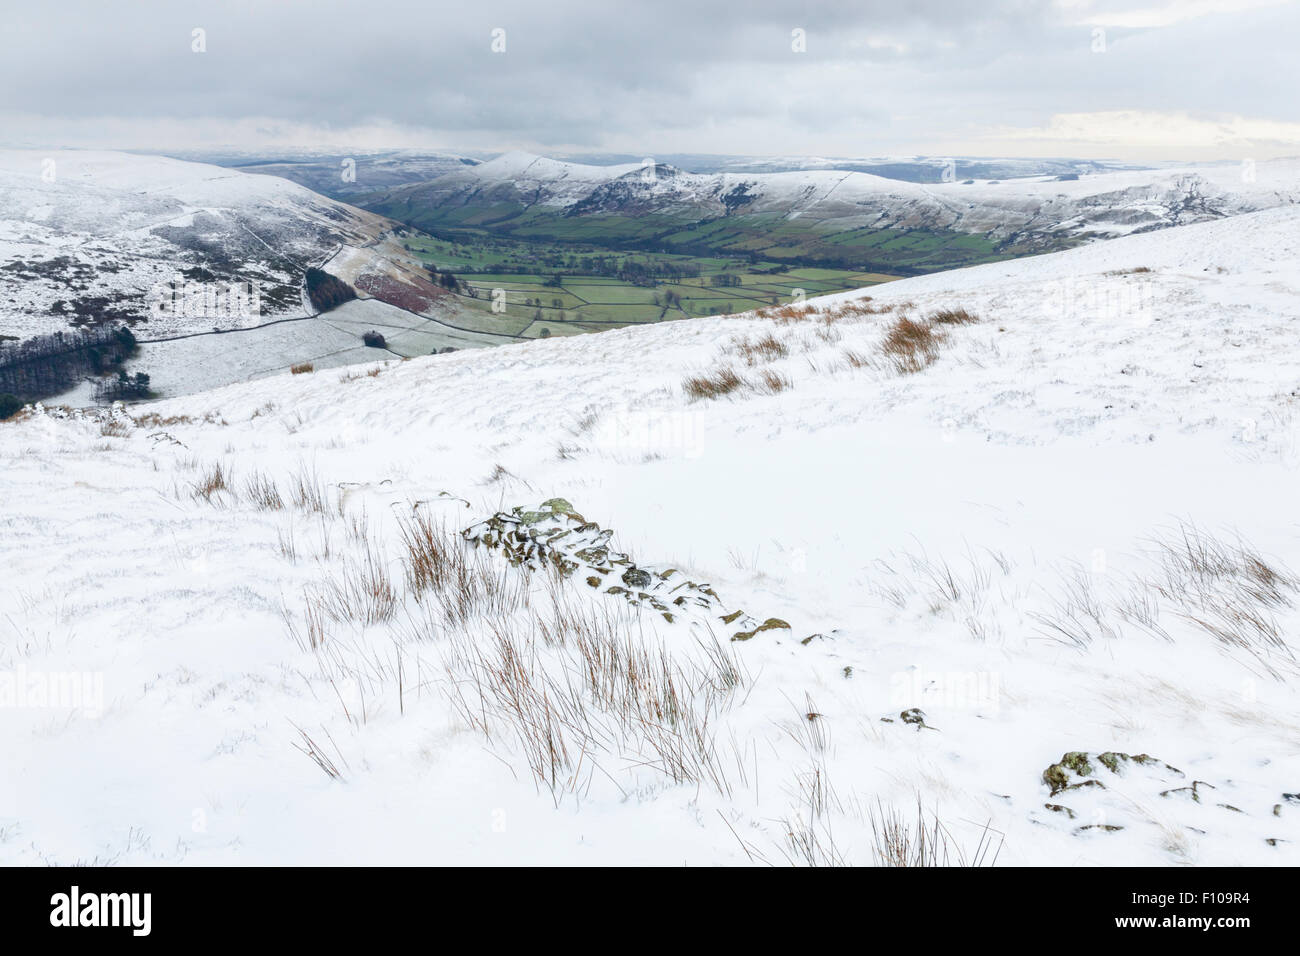 Winter landscape and snow scene or view over the Vale of Edale, Derbyshire, Peak District National Park, England, UK. Stock Photo